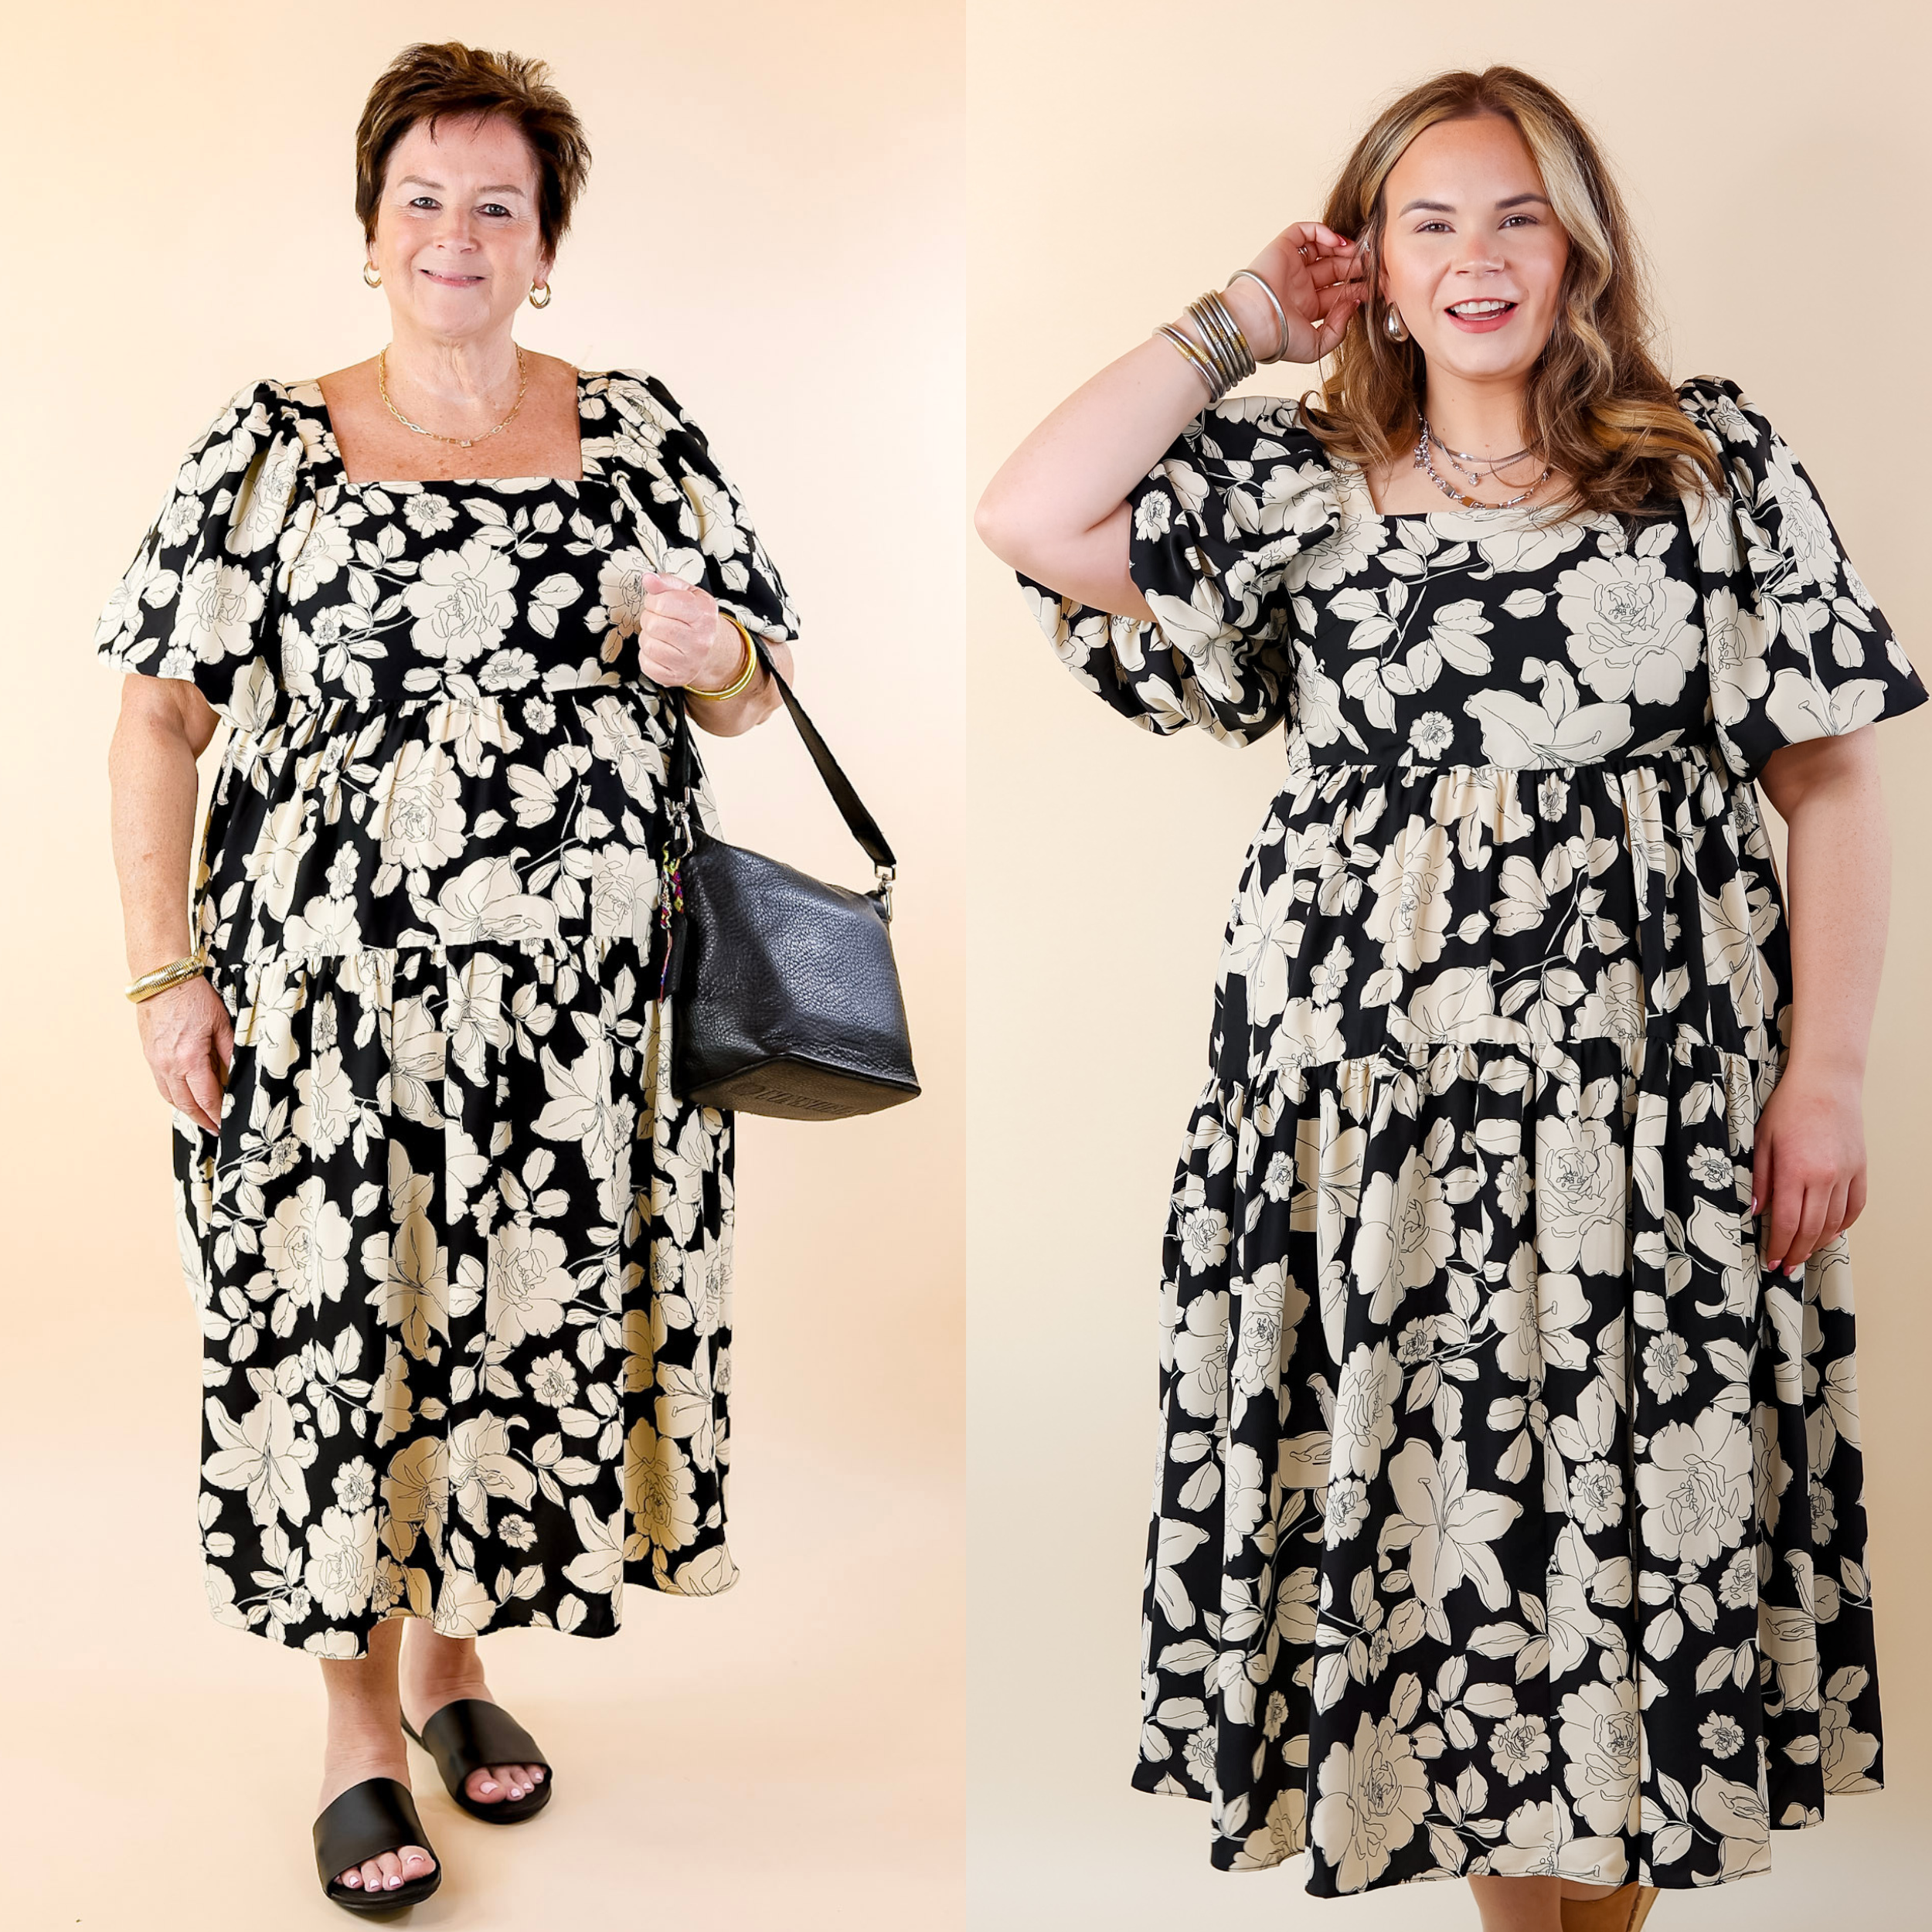 Floral Fascination Tiered Midi Dress in Black and White - Giddy Up Glamour Boutique